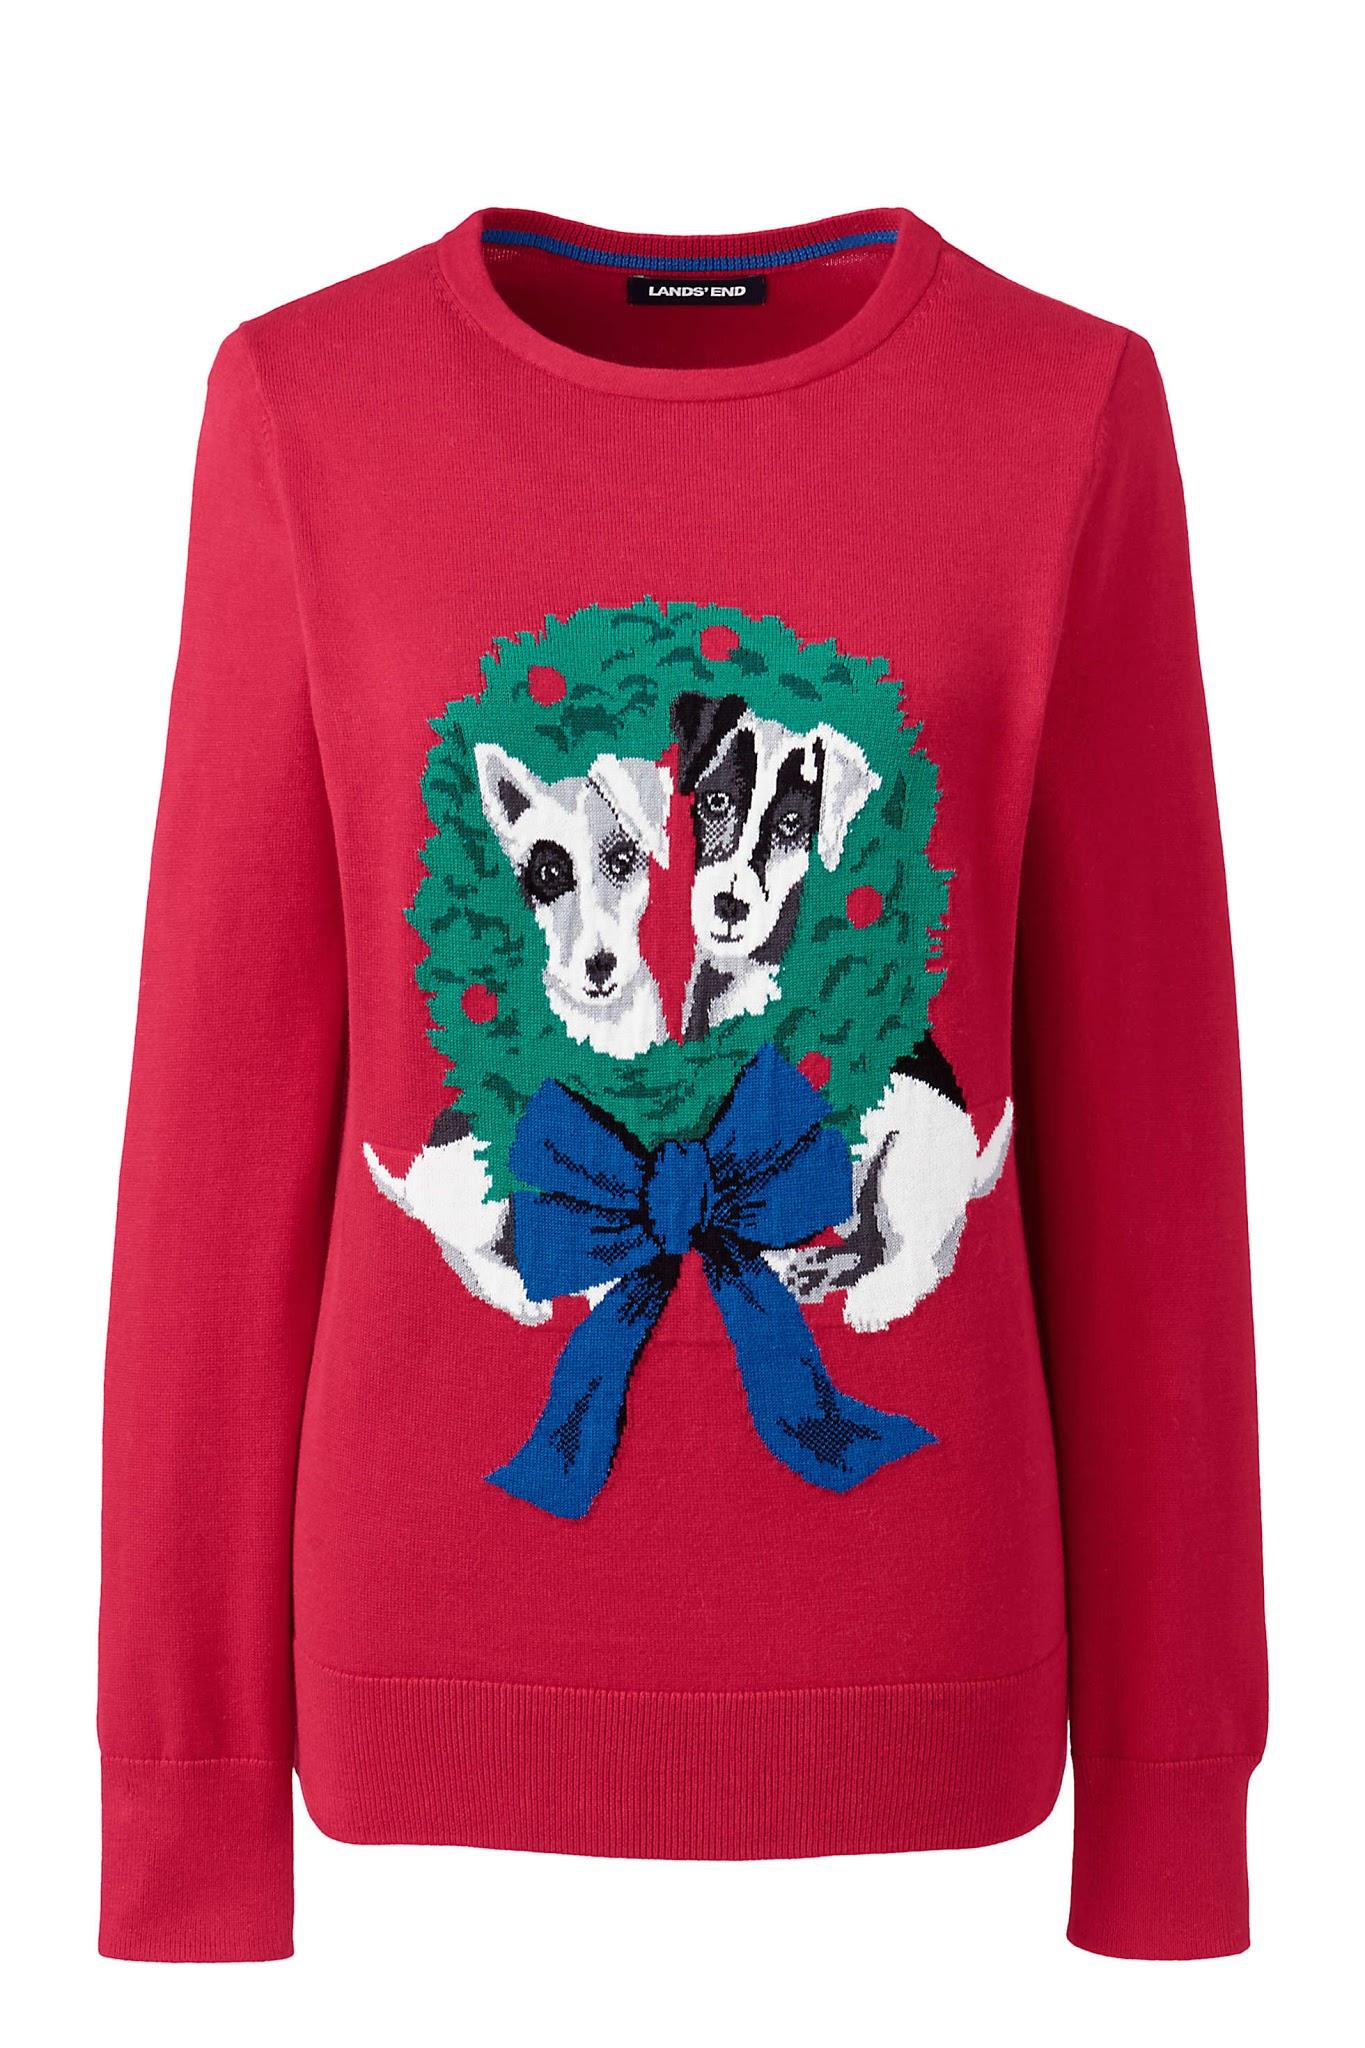 12 Awesome Christmas Sweaters! 66